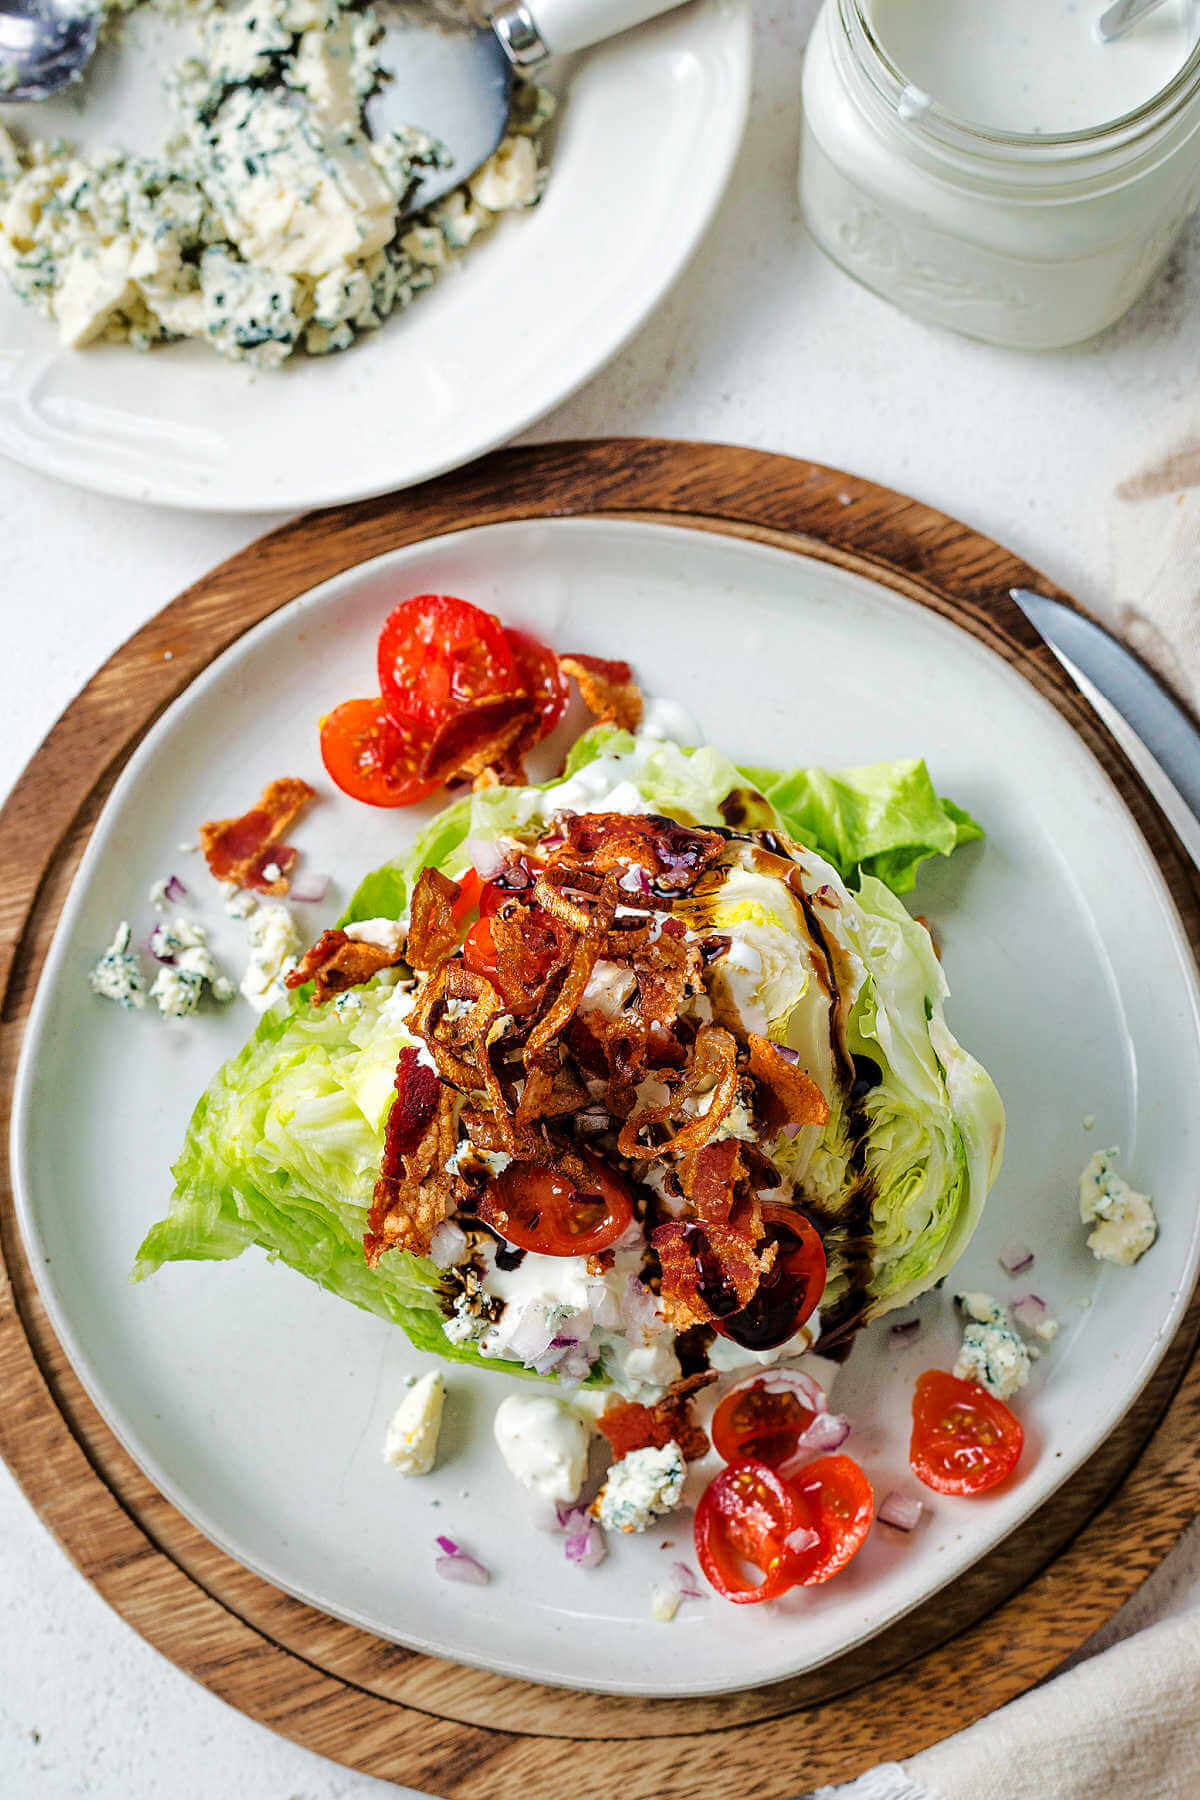 A serving of wedge salad with balsamic drizzled over top on a table.